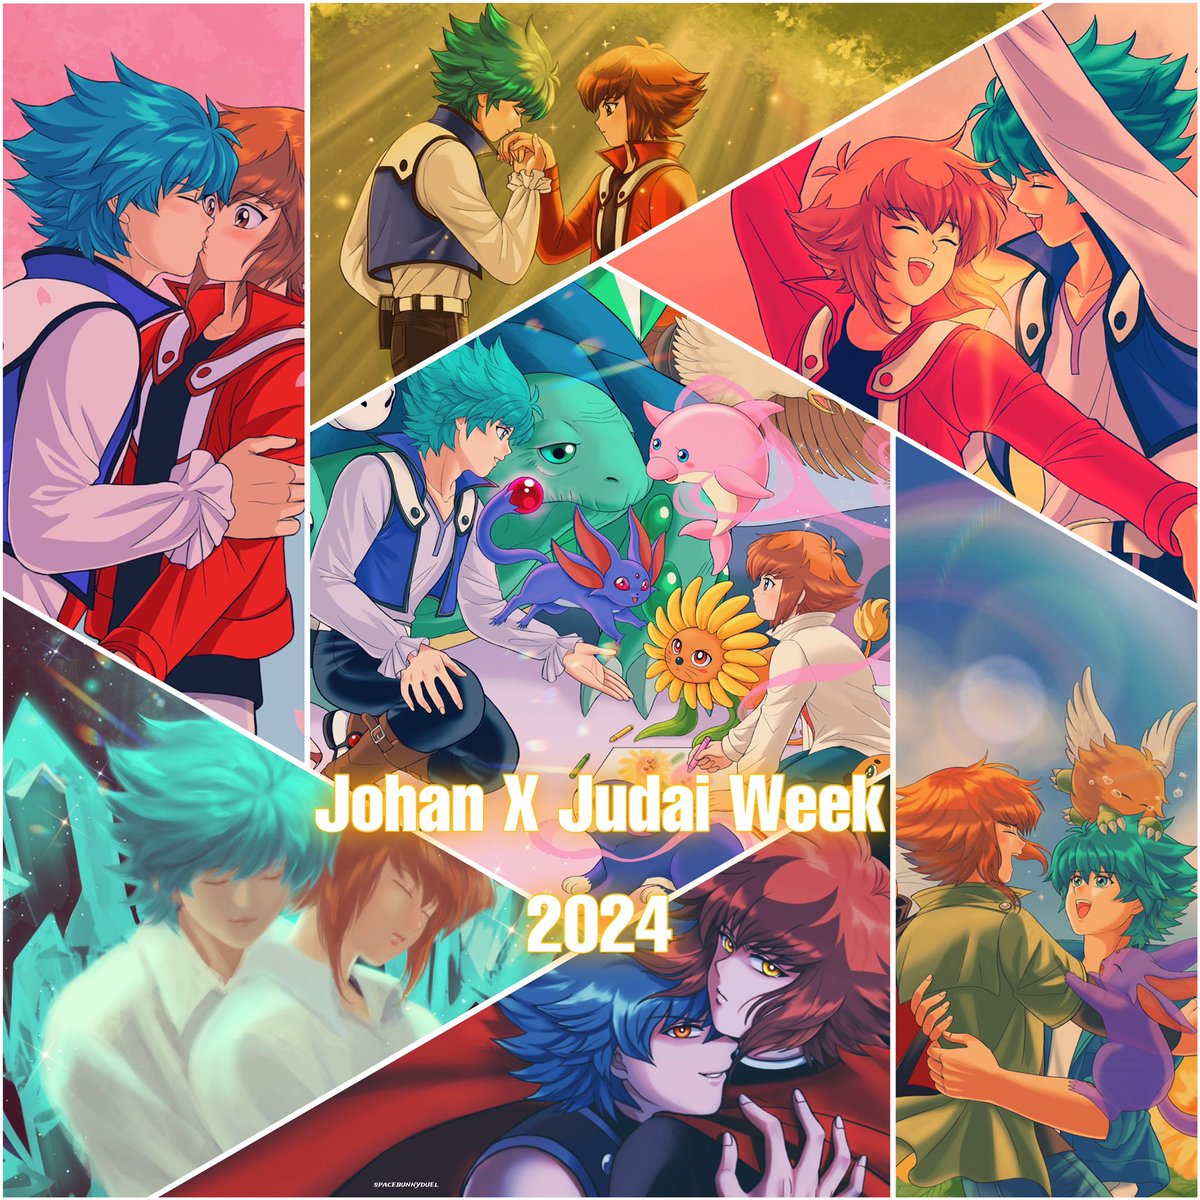 I have completed 7 arts for the event Johan x Judai Week this year! 🥹🎉✨ It was fun to participate with everyone! Thank you all so much for all the support and comments! 🙏🏻💖

🌈#JohanxJudaiWeek2024
🌈#SpiritshippingWeek2024
🌈#ヨハ十週間2024 #ヨハ十